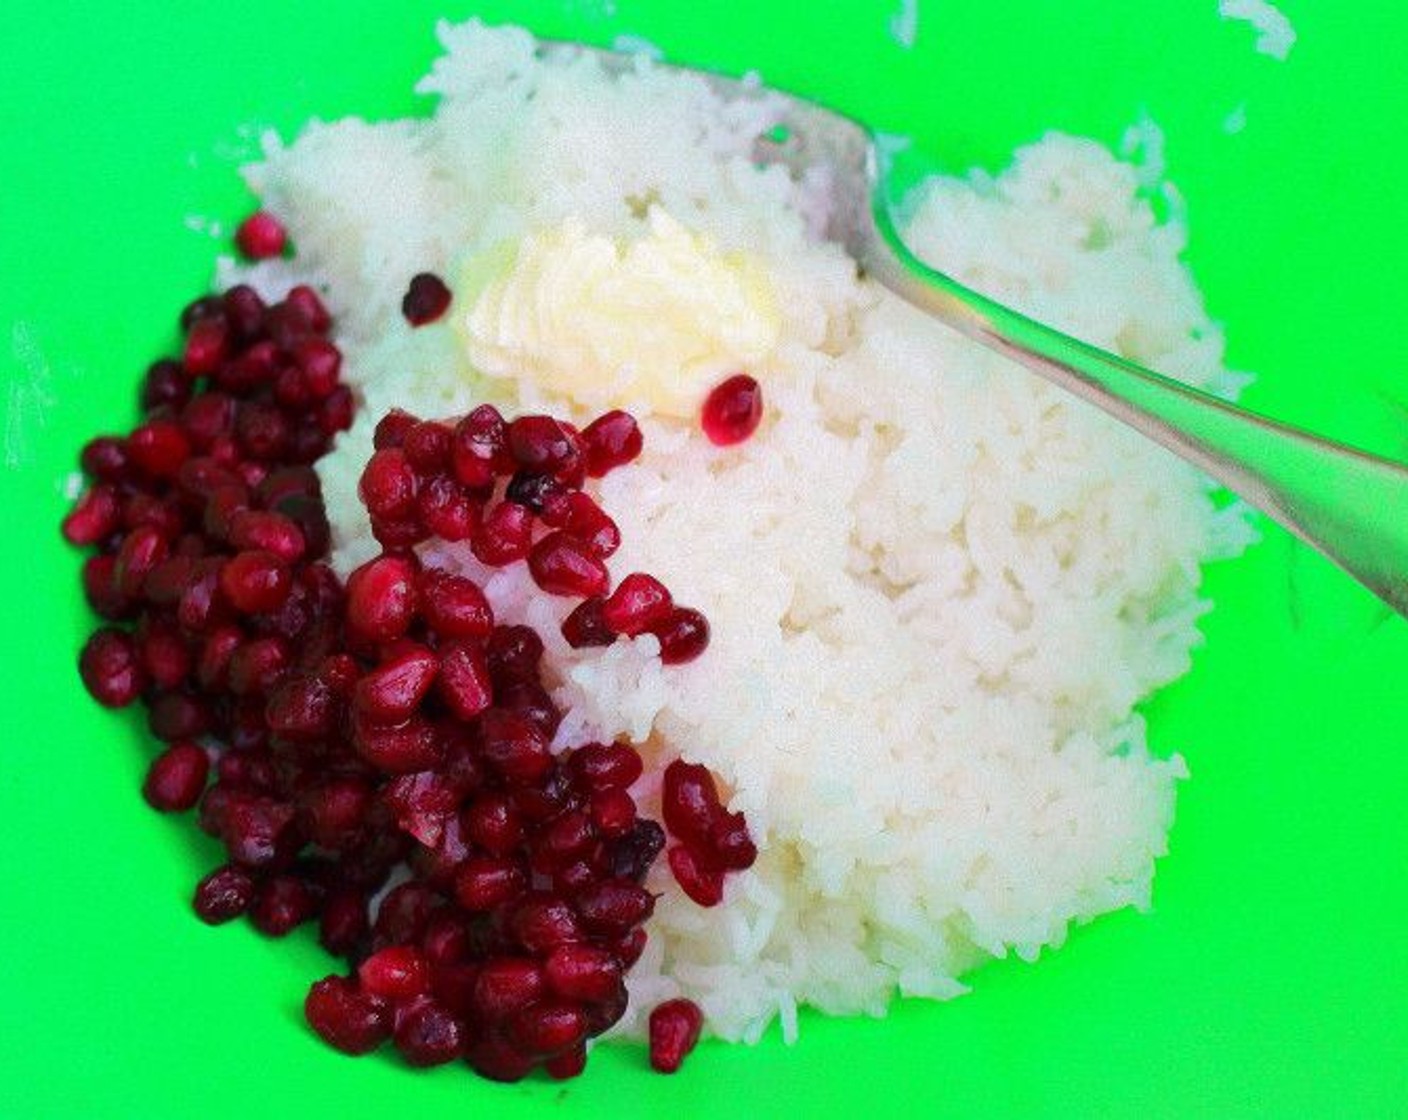 step 6 Mix together cooked White Rice (2 1/2 Tbsp), Pomegranate Seeds (1/2 cup), and Butter (1/4 cup).